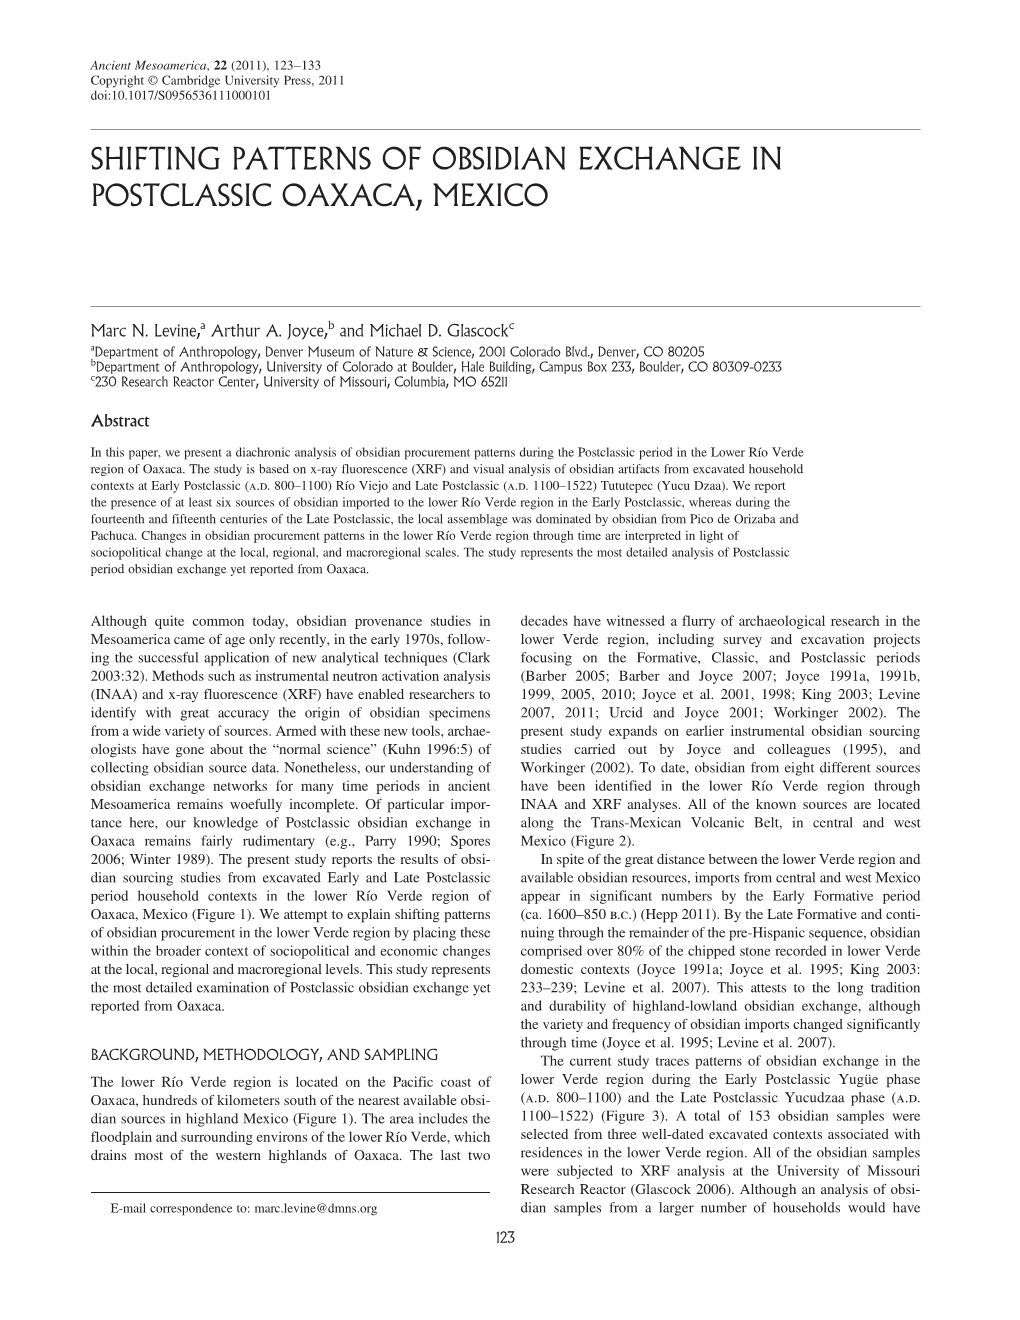 Shifting Patterns of Obsidian Exchange in Postclassic Oaxaca, Mexico